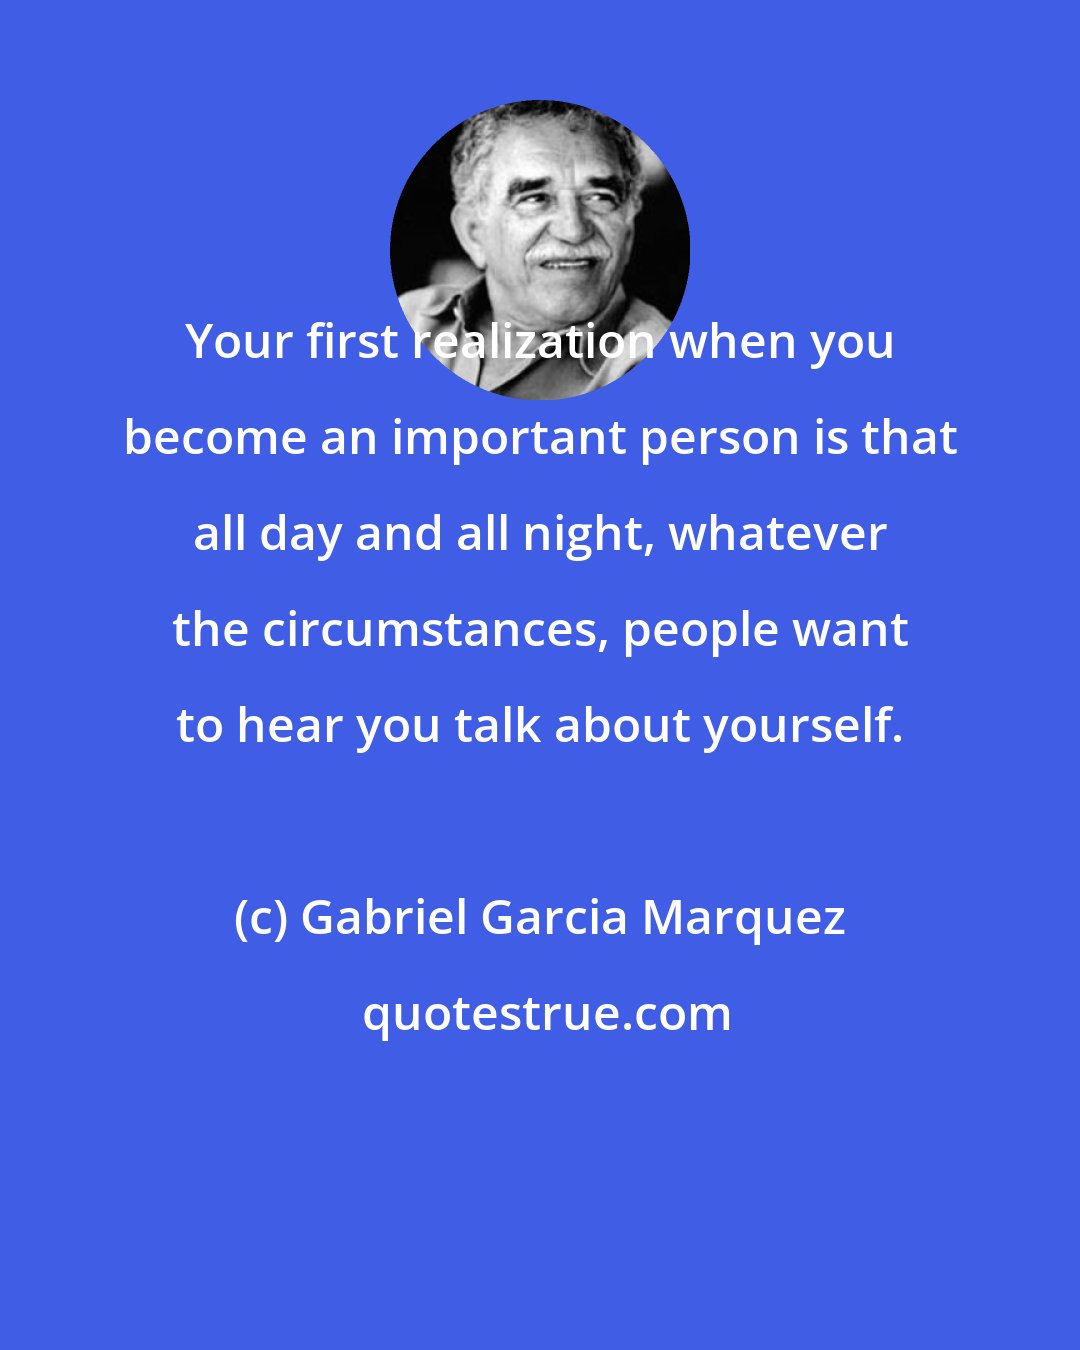 Gabriel Garcia Marquez: Your first realization when you become an important person is that all day and all night, whatever the circumstances, people want to hear you talk about yourself.